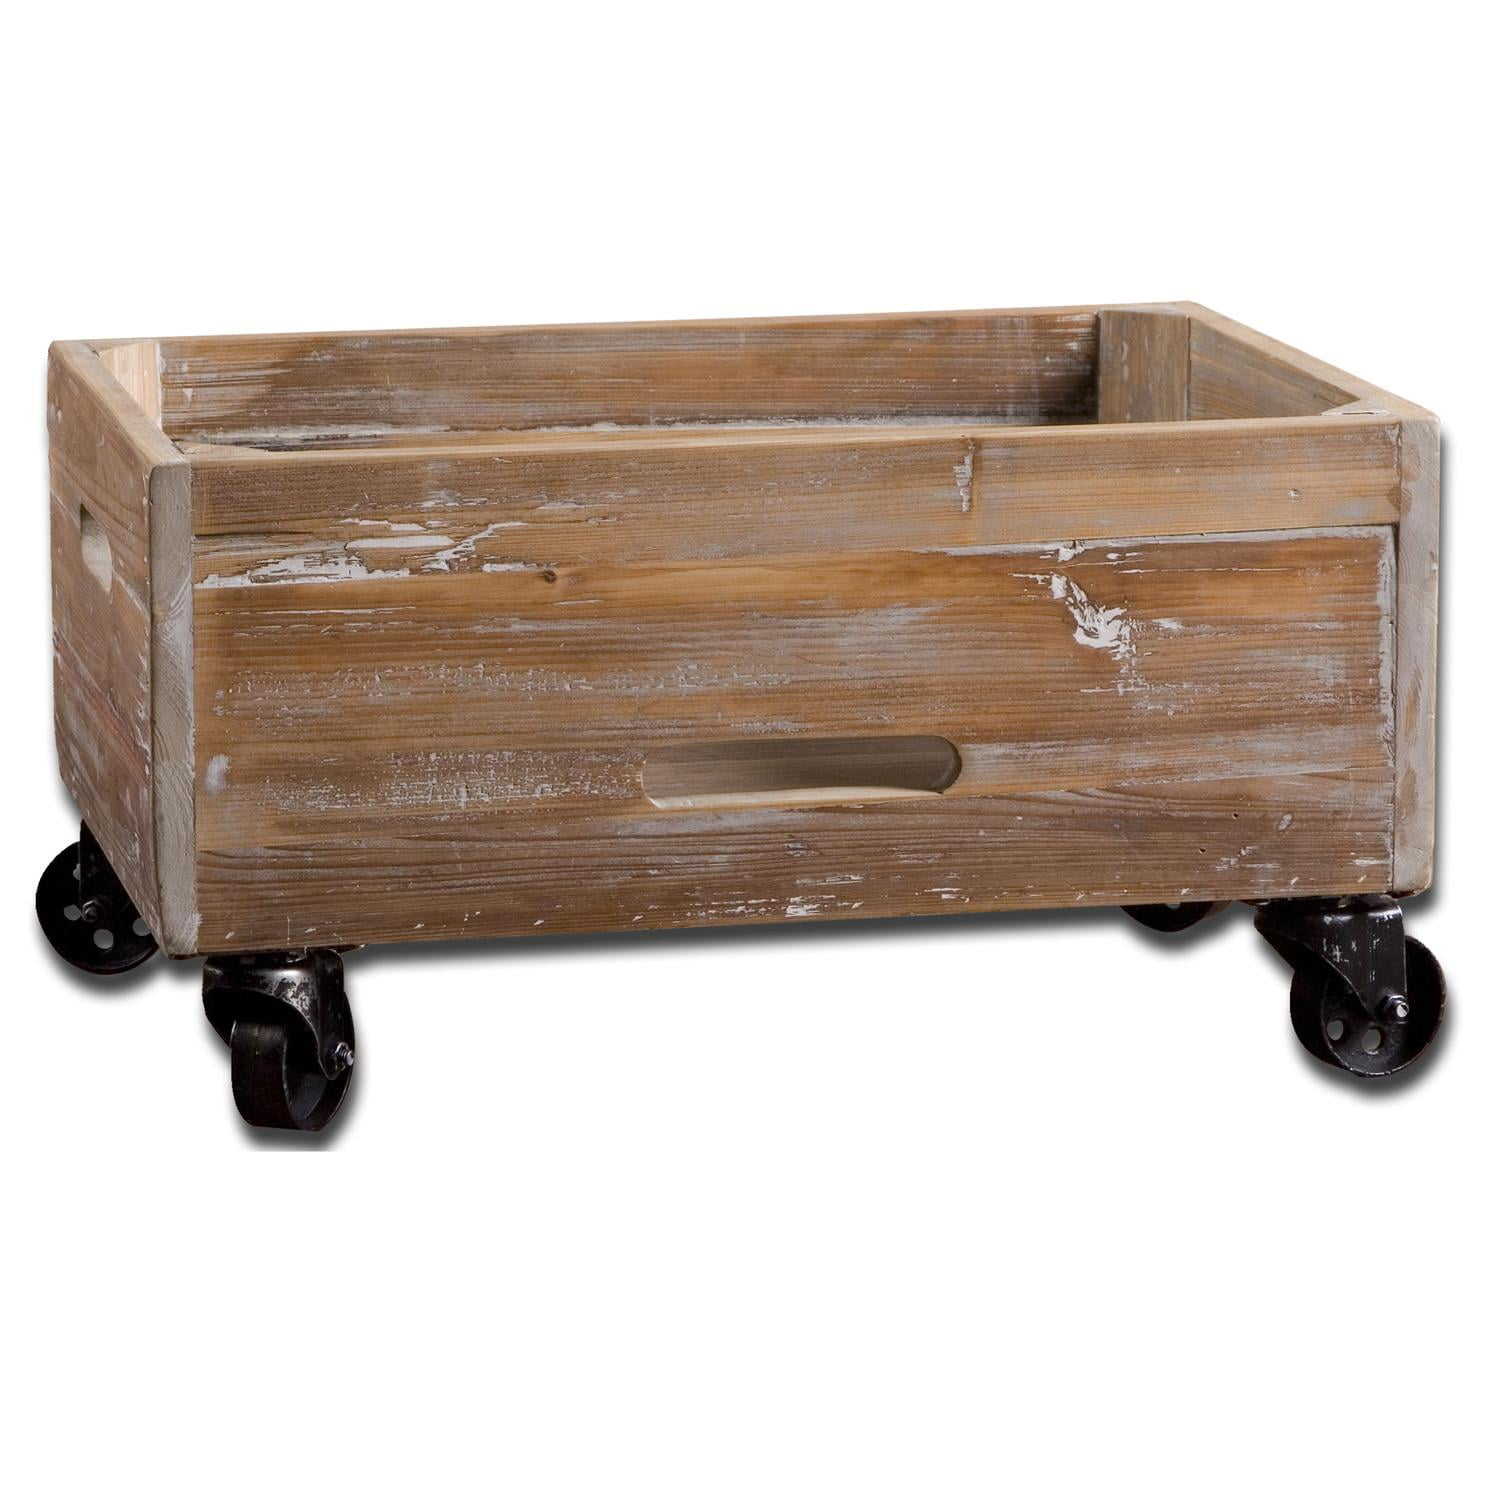 24 Blake Gray Washed Reclaimed Wood, Wooden Storage Crates On Wheels